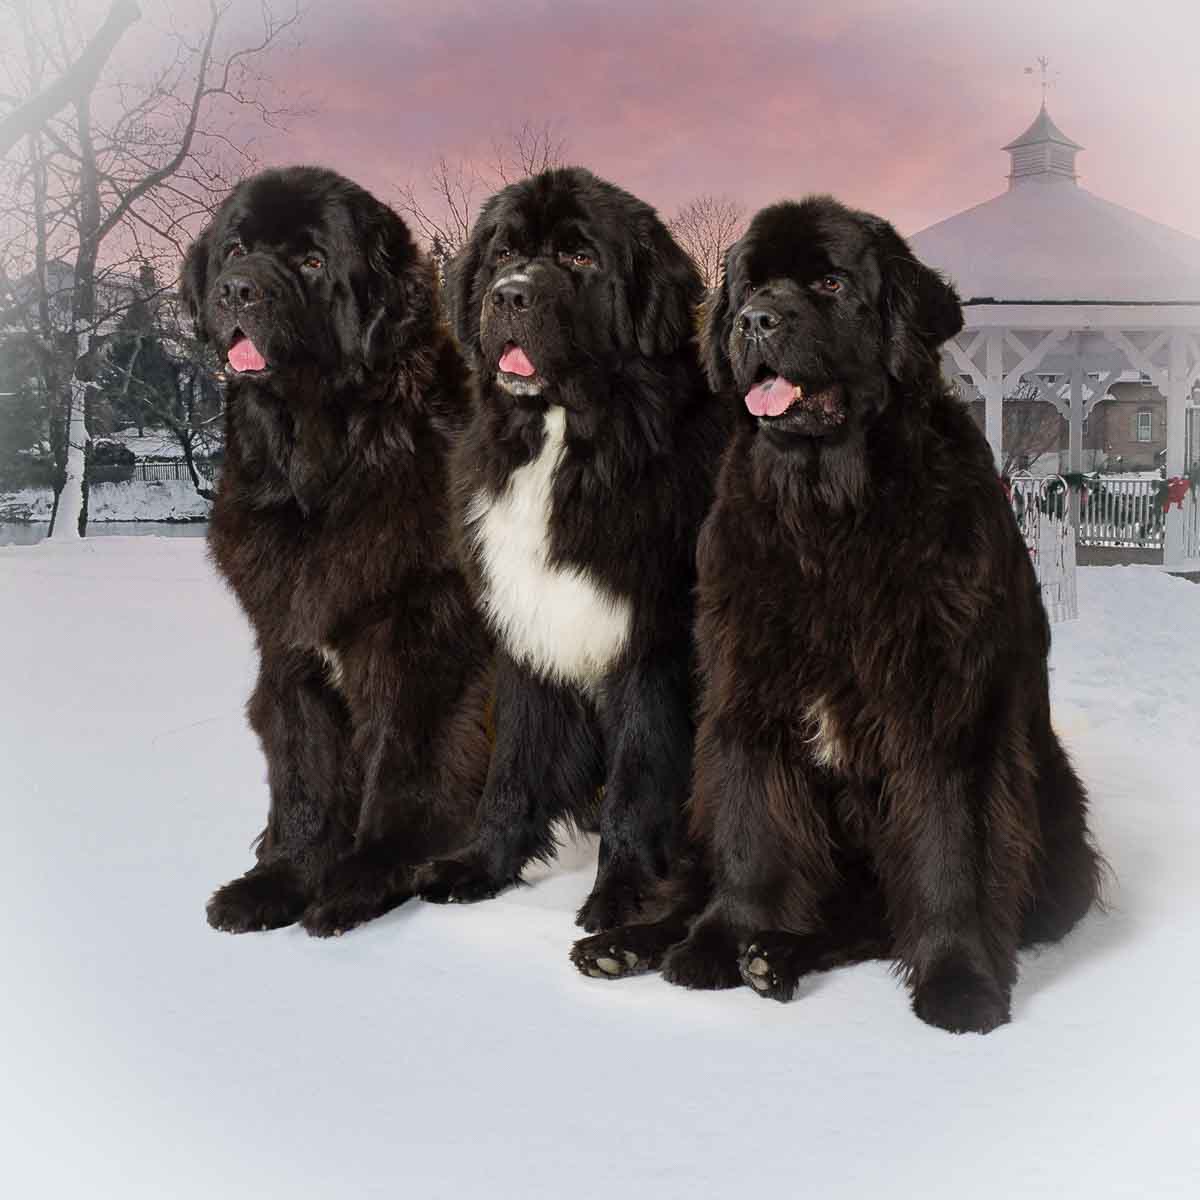 Three black and white dogs sitting in the snow.